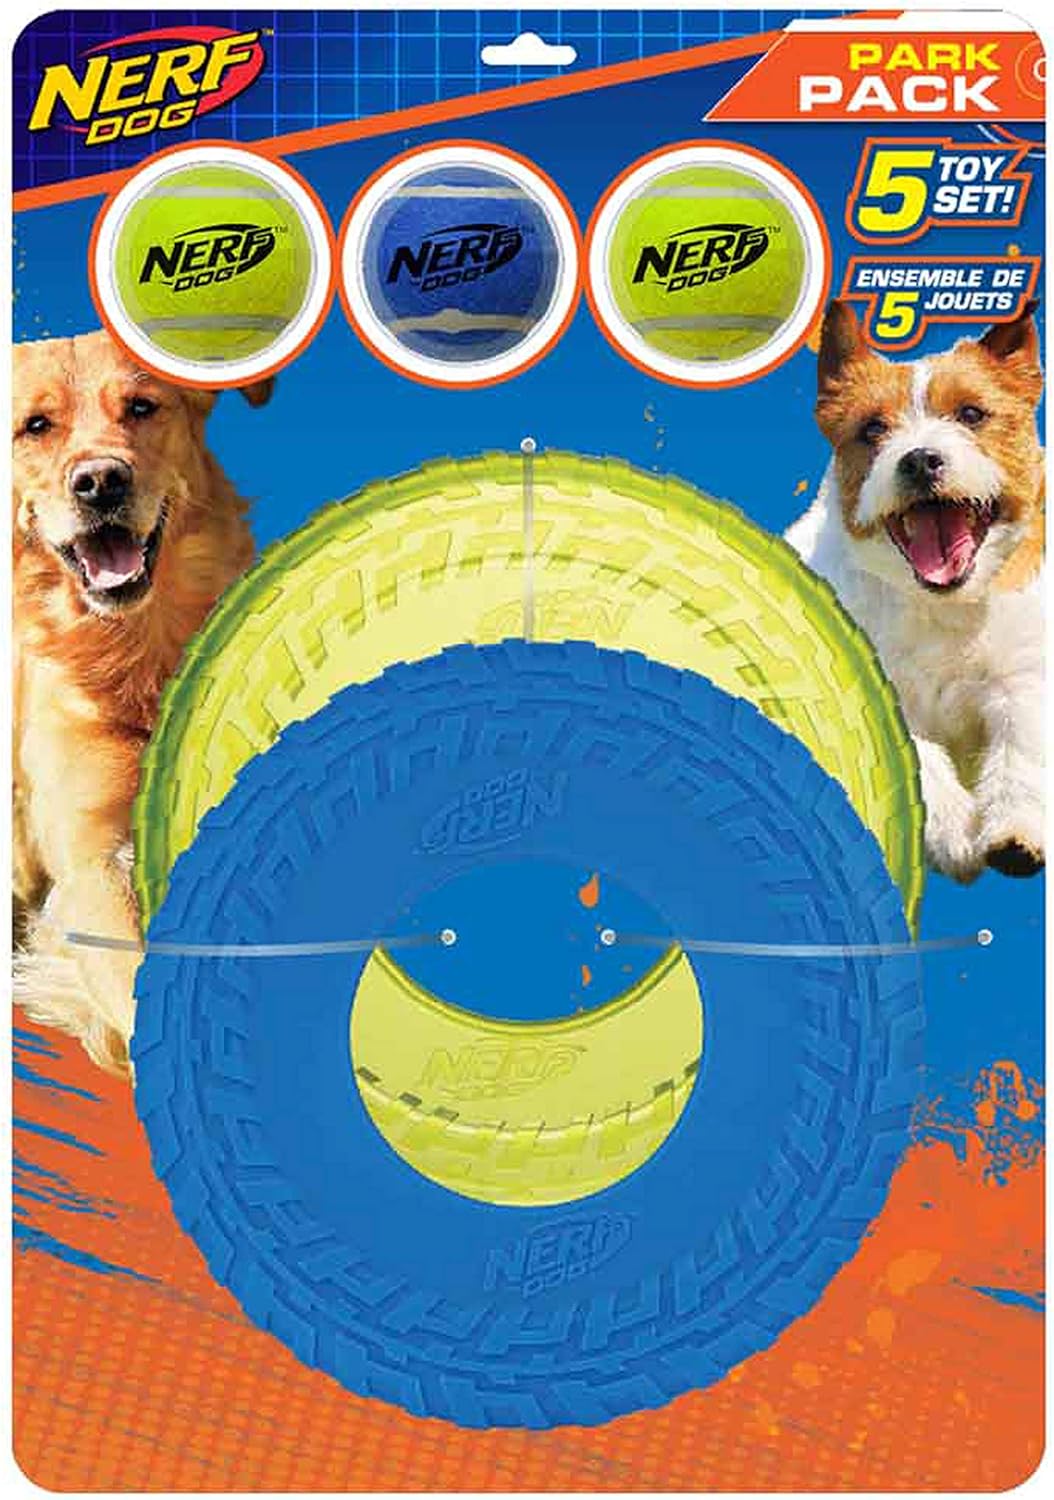 My dog absolutely loves playing fetch with this. The material and size (we have had 5 now) are perfect and always throw great. We cant leave them alone with dog though because he always has to eat and destroy toys if he can. So although they are tough and good quality, they are not destruction proof. I have a big 100lb Pitbull though so we have yet to find a toy he cant destroy. Still highly worth it if your dog likes to play fetch. I recommend having two on hand (one to throw and one to grab 